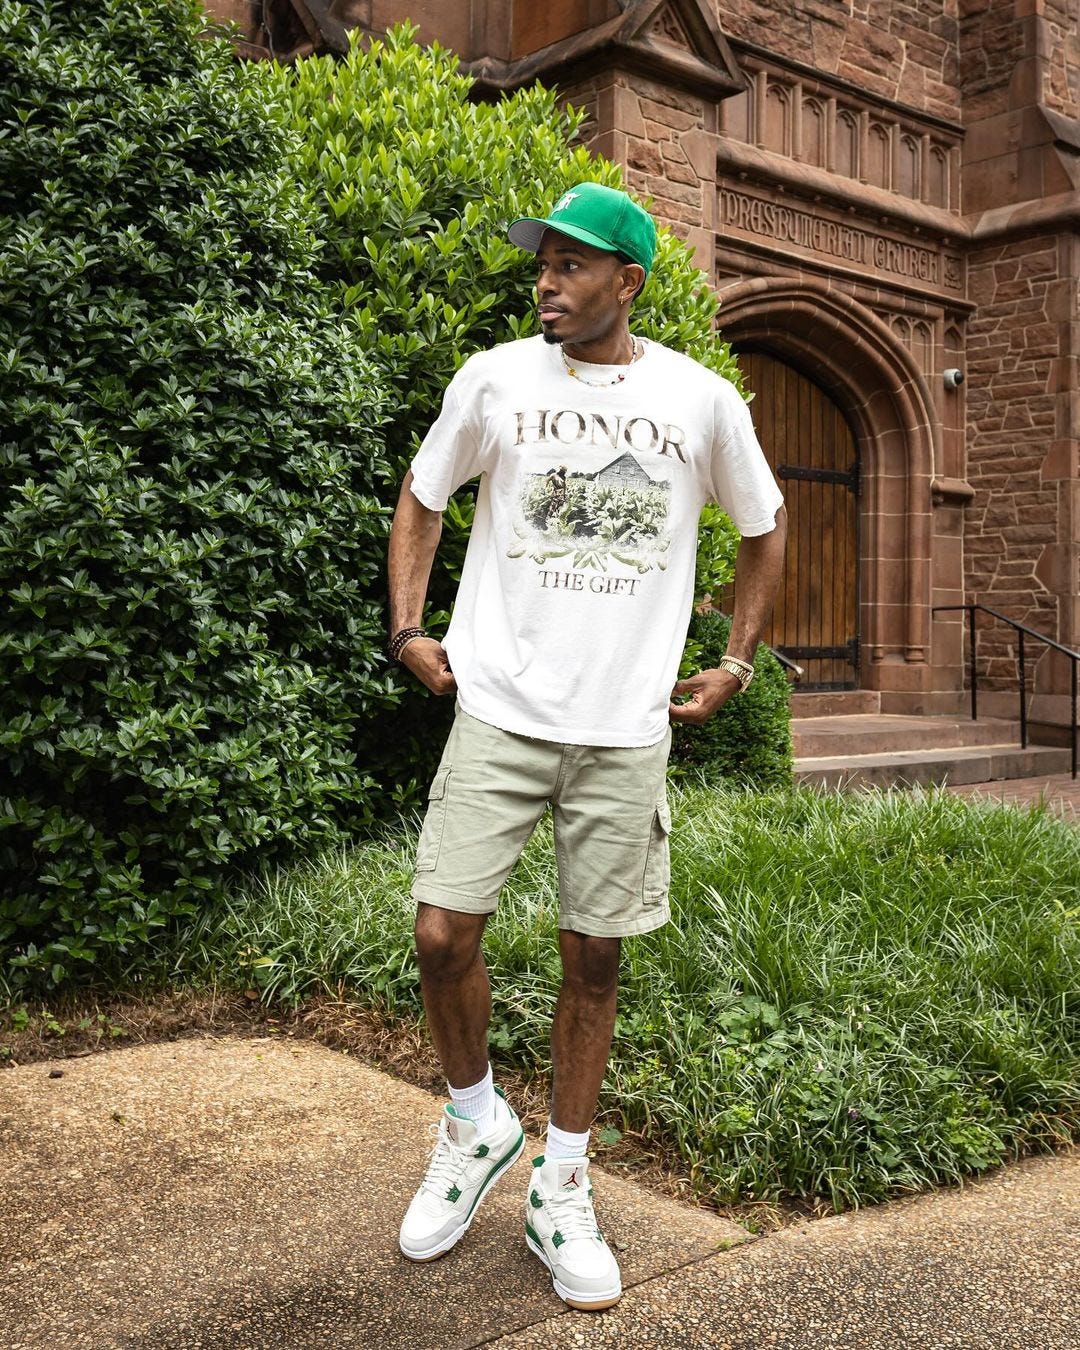 man in front of a church wearing a t-shirt that says "Honor the gift" , cargo shorts, and white Nike sneakers with green accents